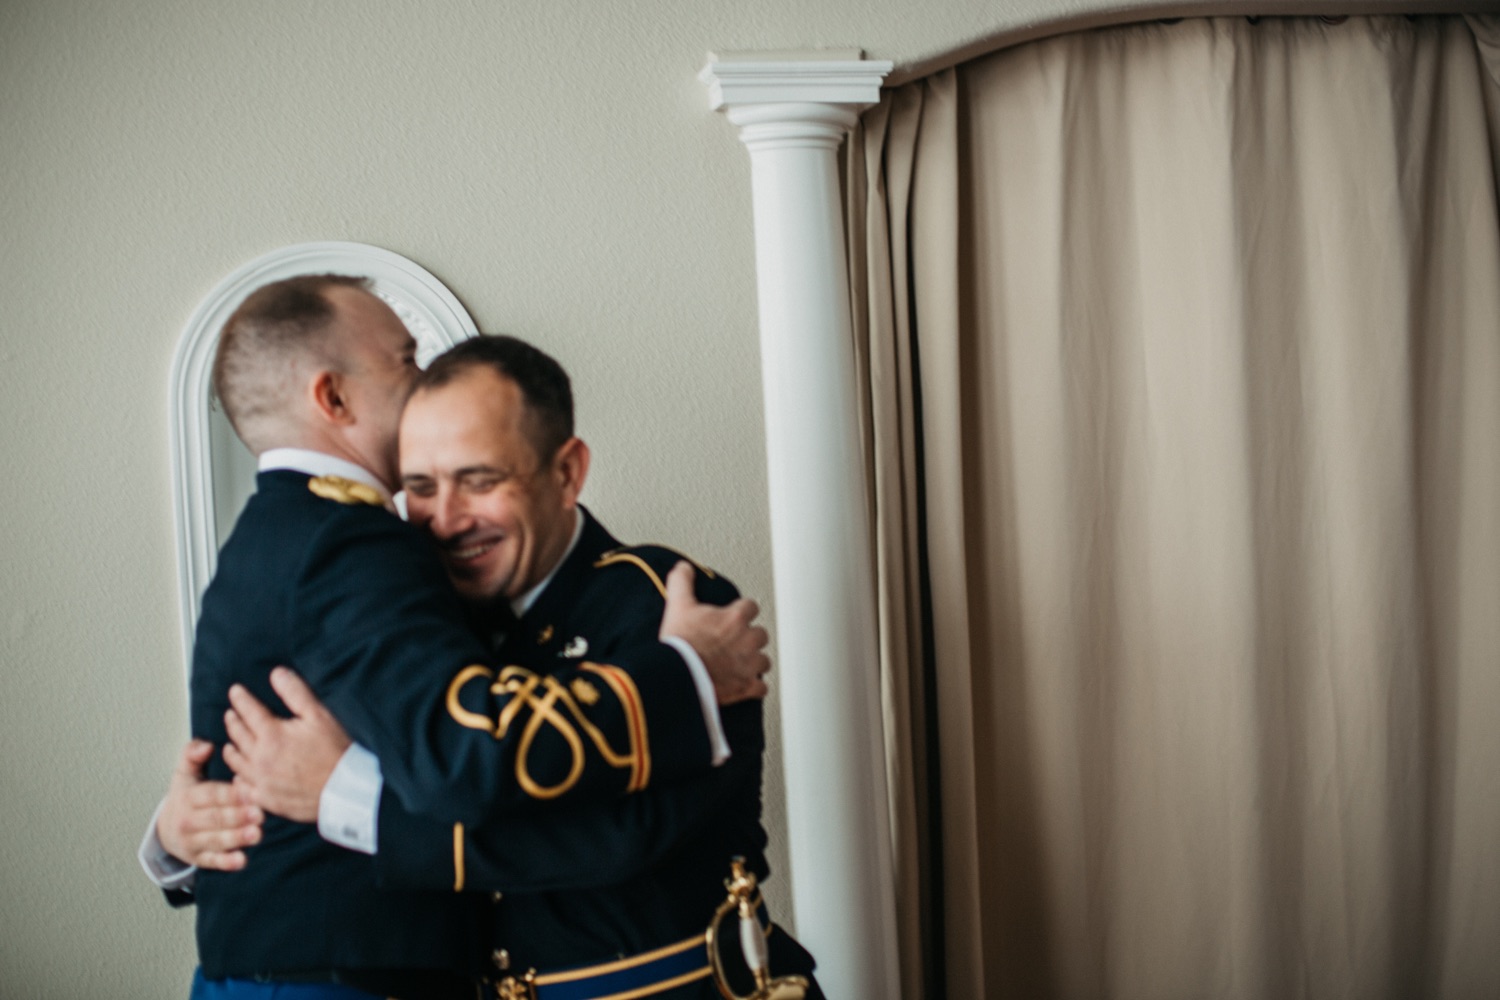 military-officers-hugging-each-other-before-groom-gets-married